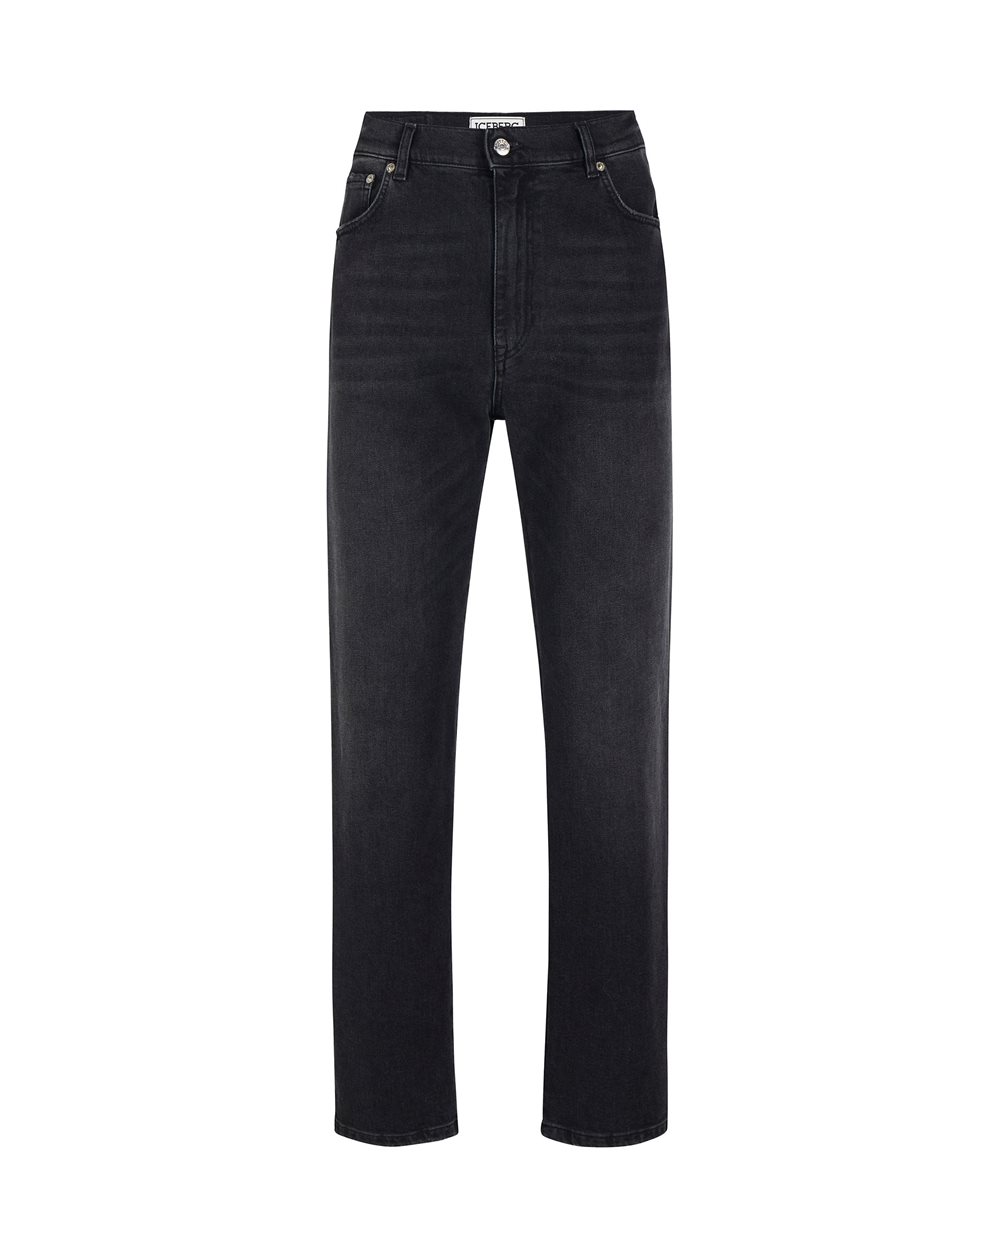 Black jeans with logo - TROUSERS AND JEANS | Iceberg - Official Website